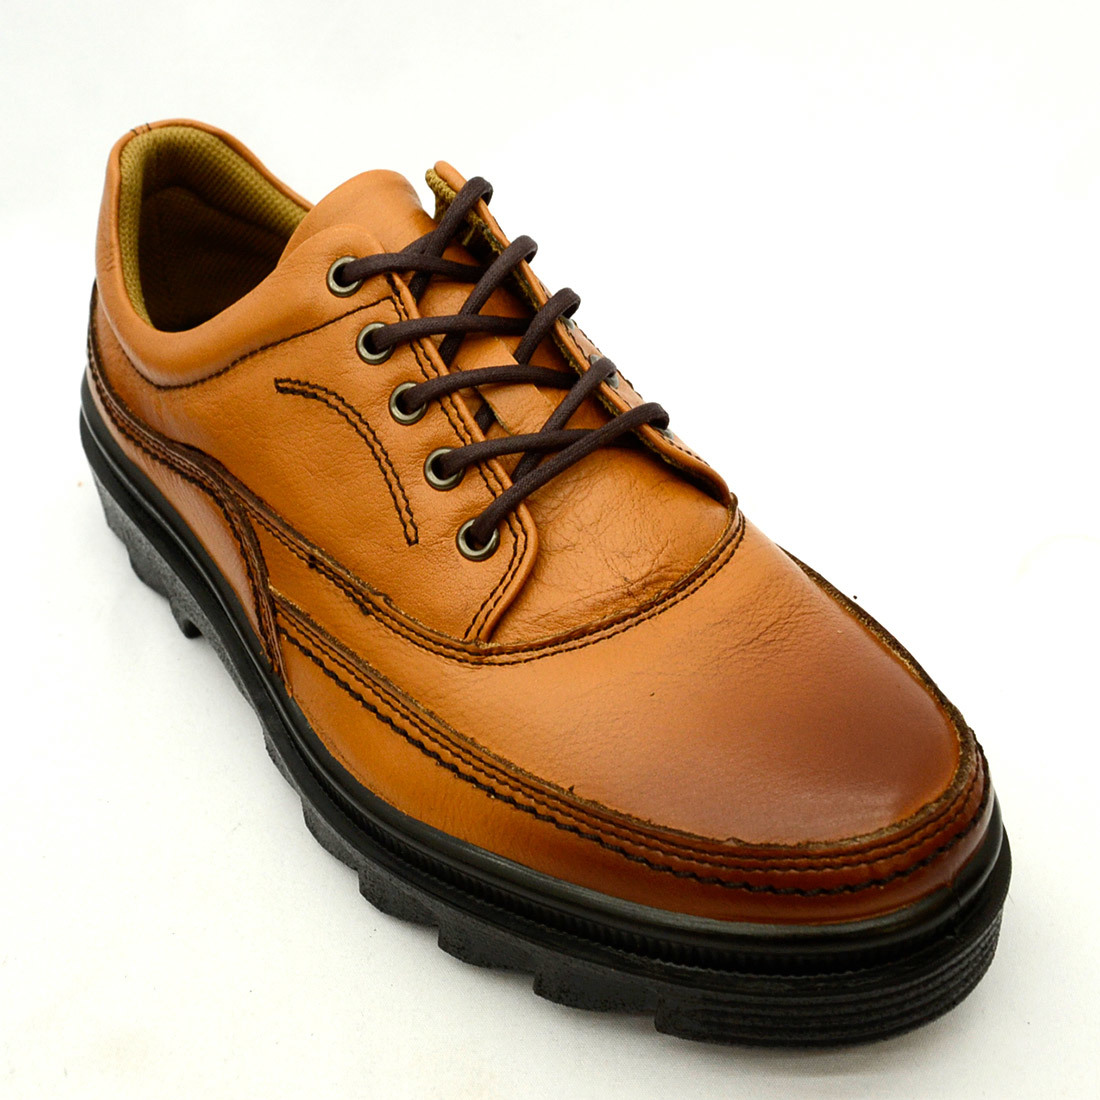 ^BOBSON Bobson casual shoes walking wide width 3E 4355 Brown Brown tea 25.0cm (0910010284-br-s250)